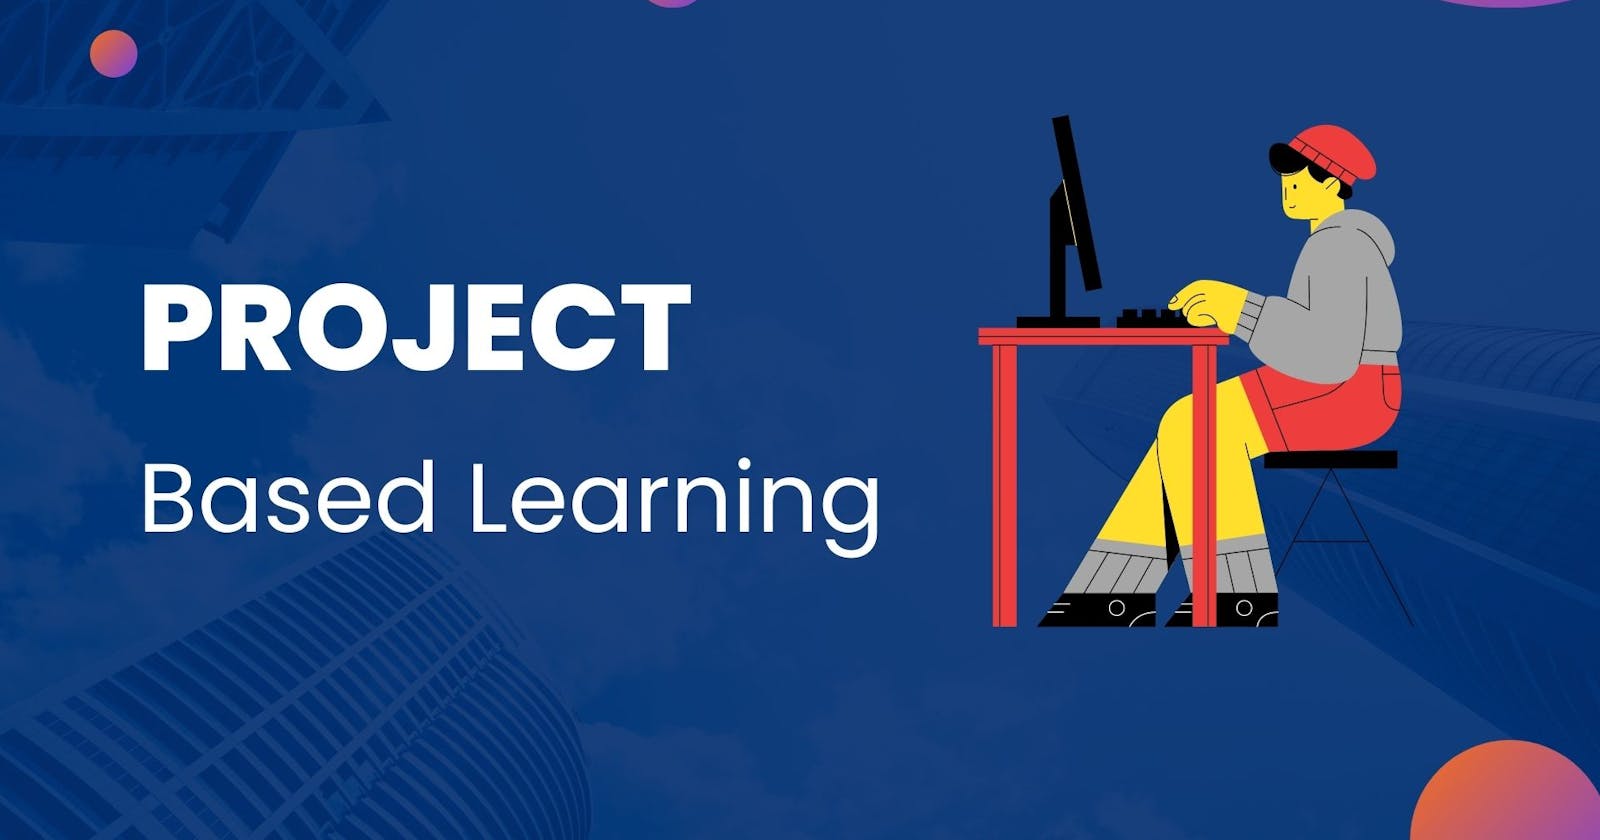 Project-based learning: Learn by doing